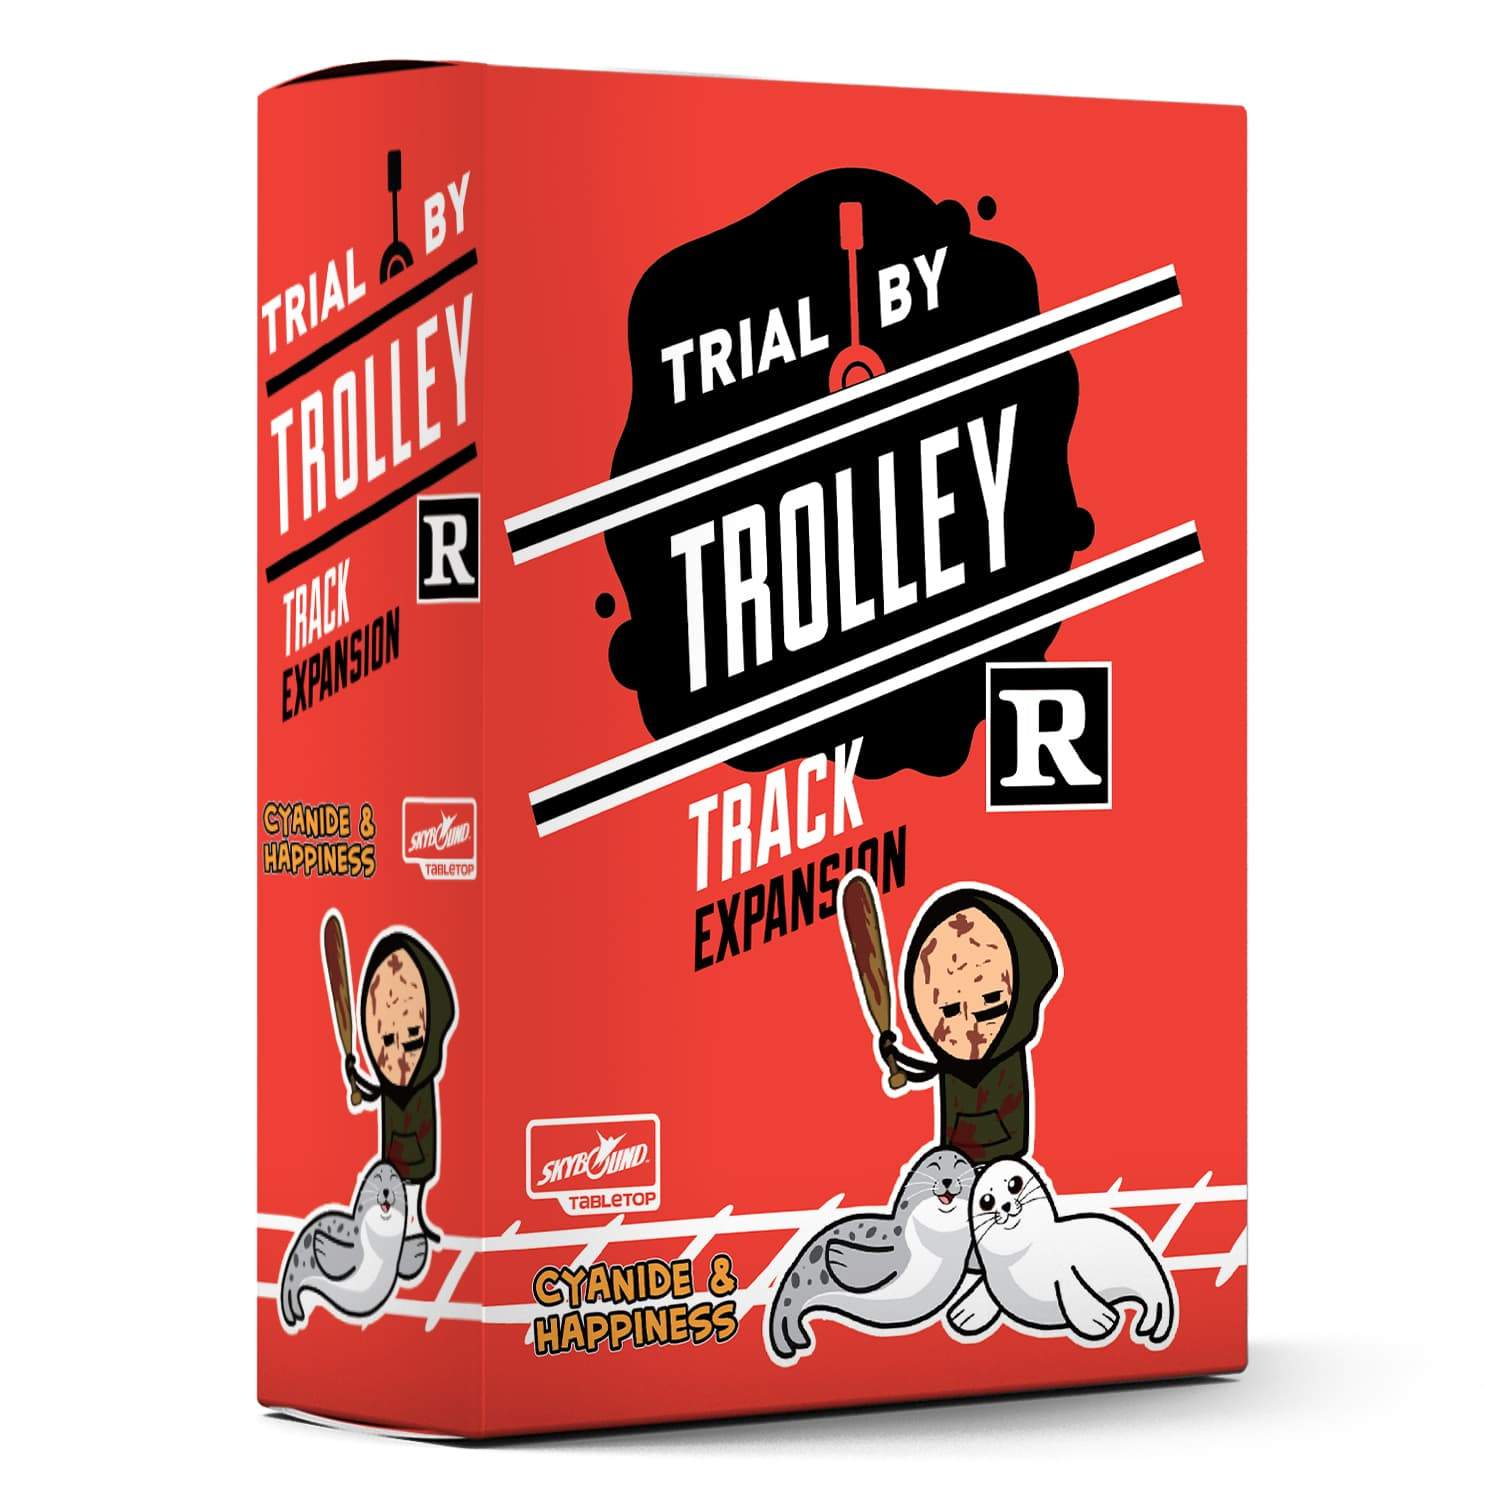 Trial by Trolley Track Expansion